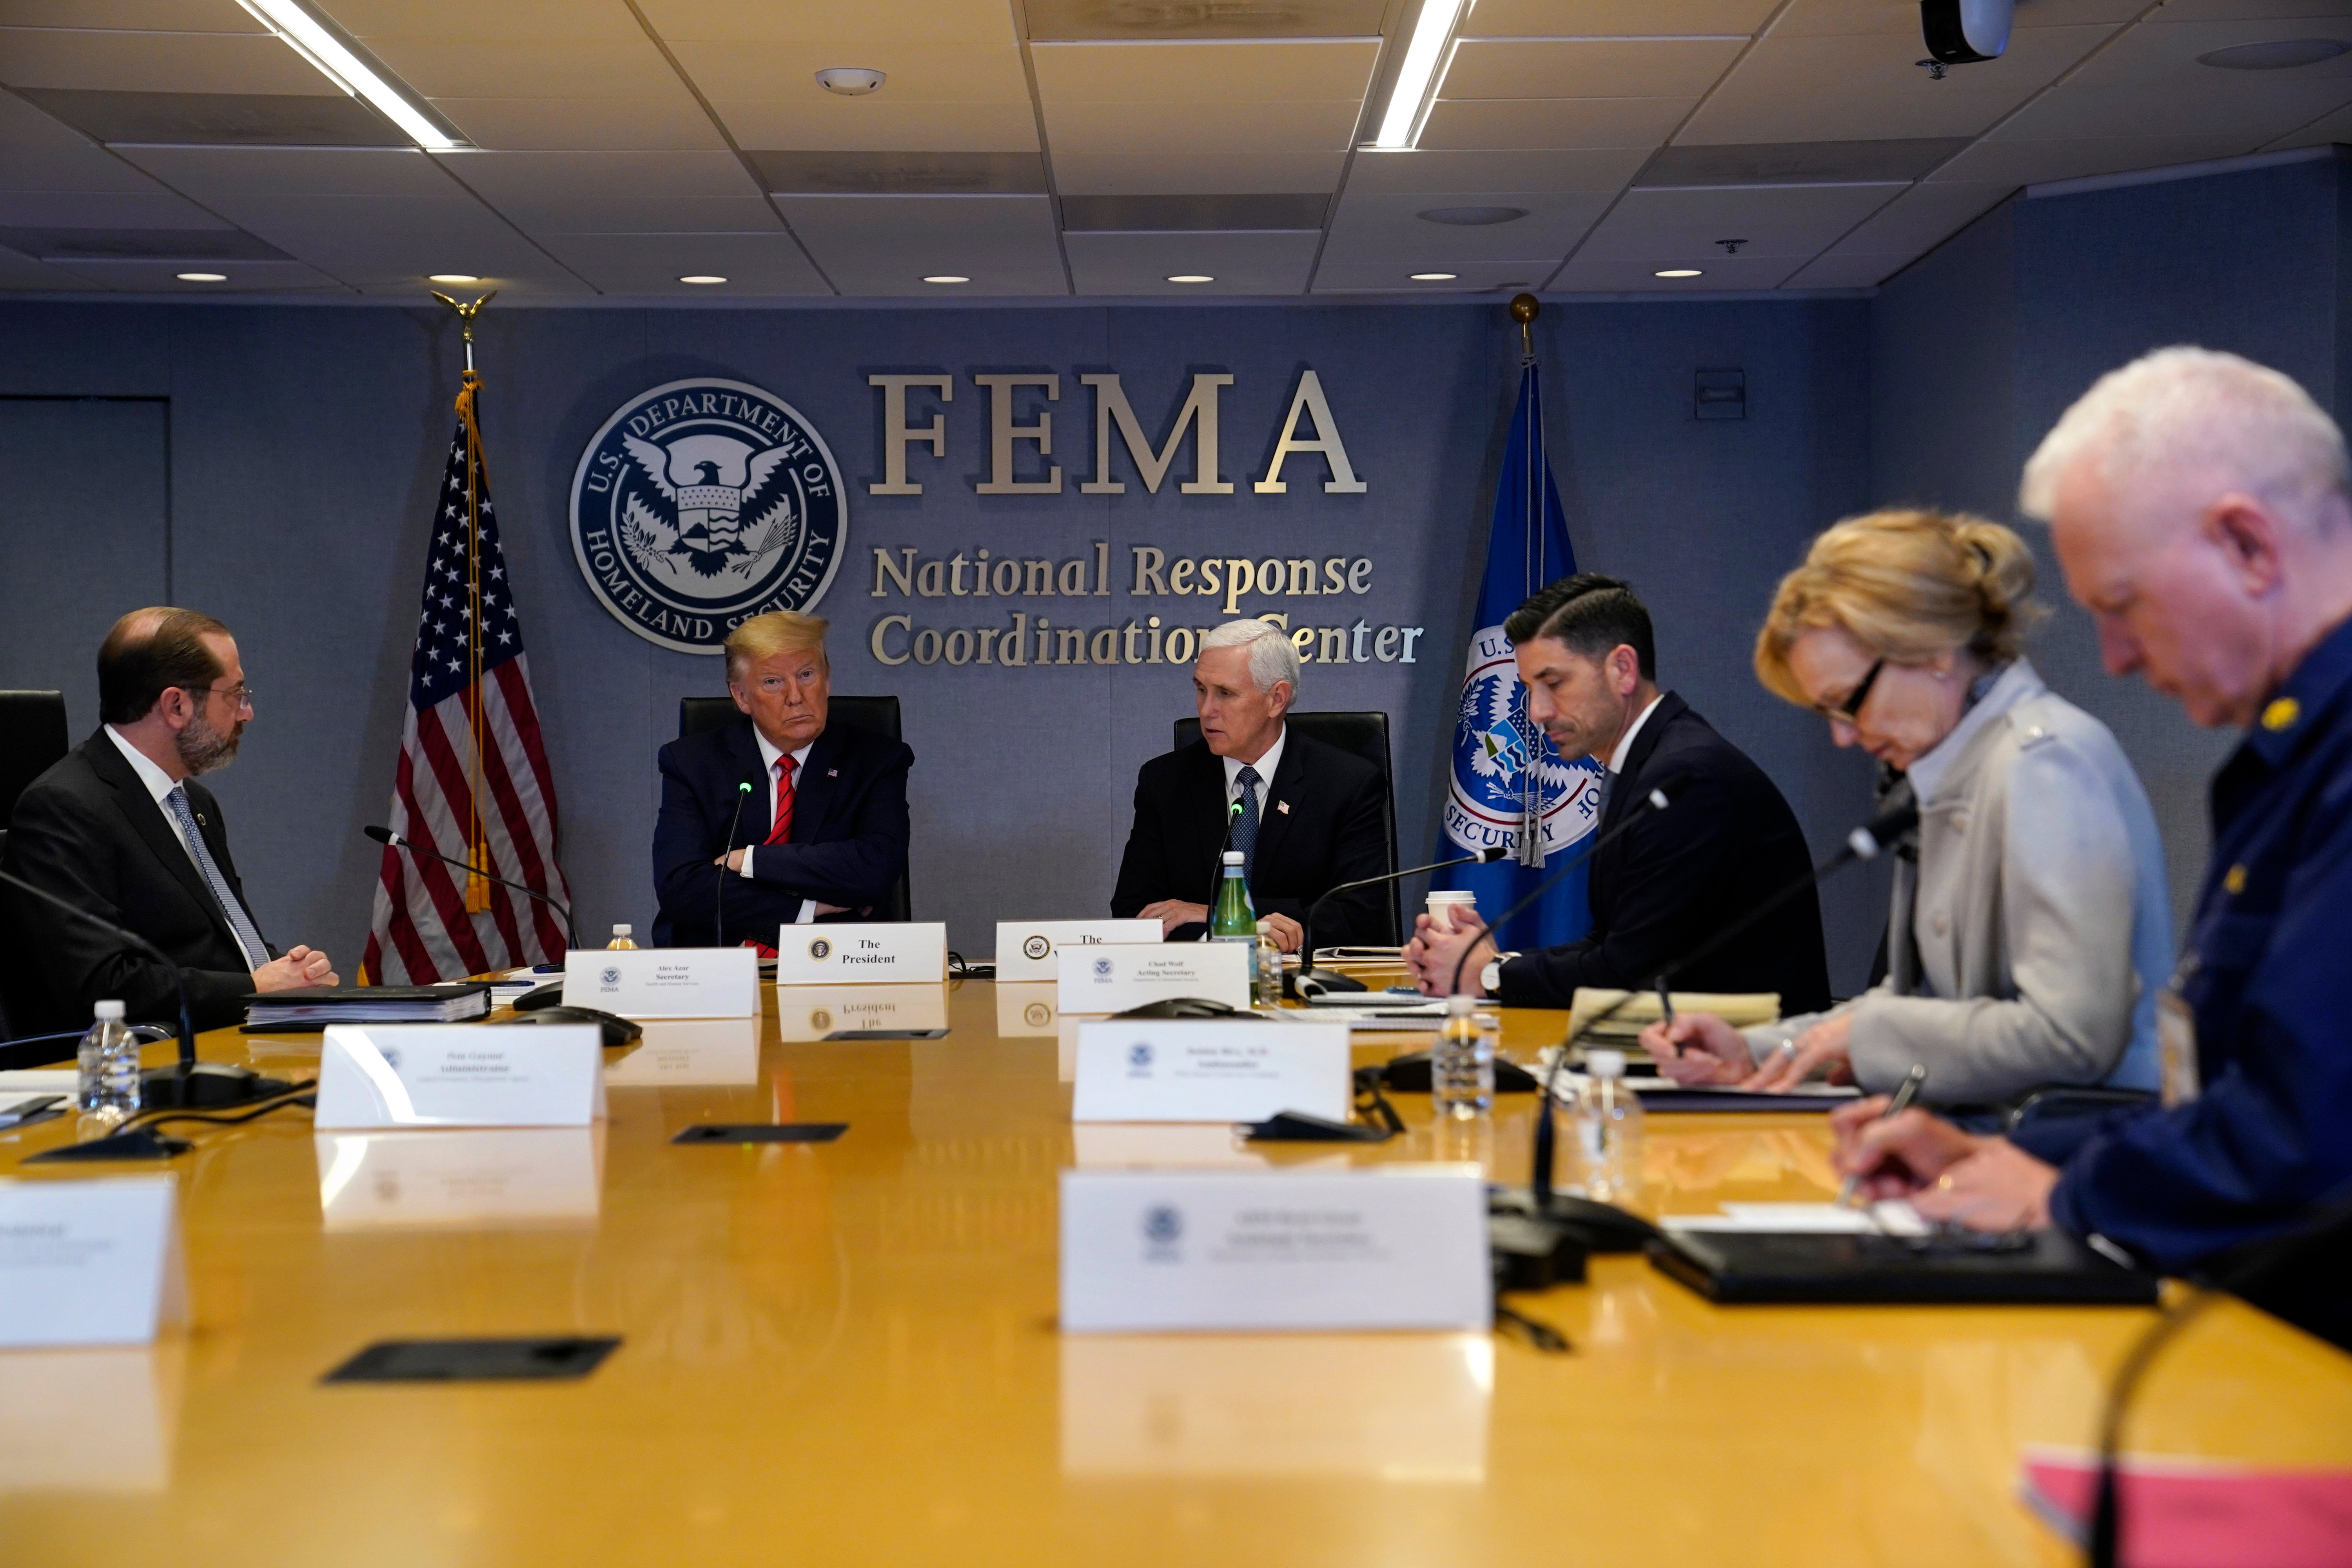 WASHINGTON, DC - MARCH 19: President Donald Trump attends a teleconference with governors at the Federal Emergency Management Agency headquarters From left, Department of Health and Human Services Secretary Alex Azar, Trump, Vice President Mike Pence, Acting Secretary of Homeland Security Chad Wolf, White House coronavirus response coordinator Dr. Deborah Birx and Adm. Brett Giroir, assistant secretary for health on March 19, 2020 in Washington, DC. With Americans testing positive from coronavirus rising President Trump is asking Congress for $1 trillion aid package to deal with the COVID-19 pandemic. (Photo by Evan Vucci-Pool/Getty Images)